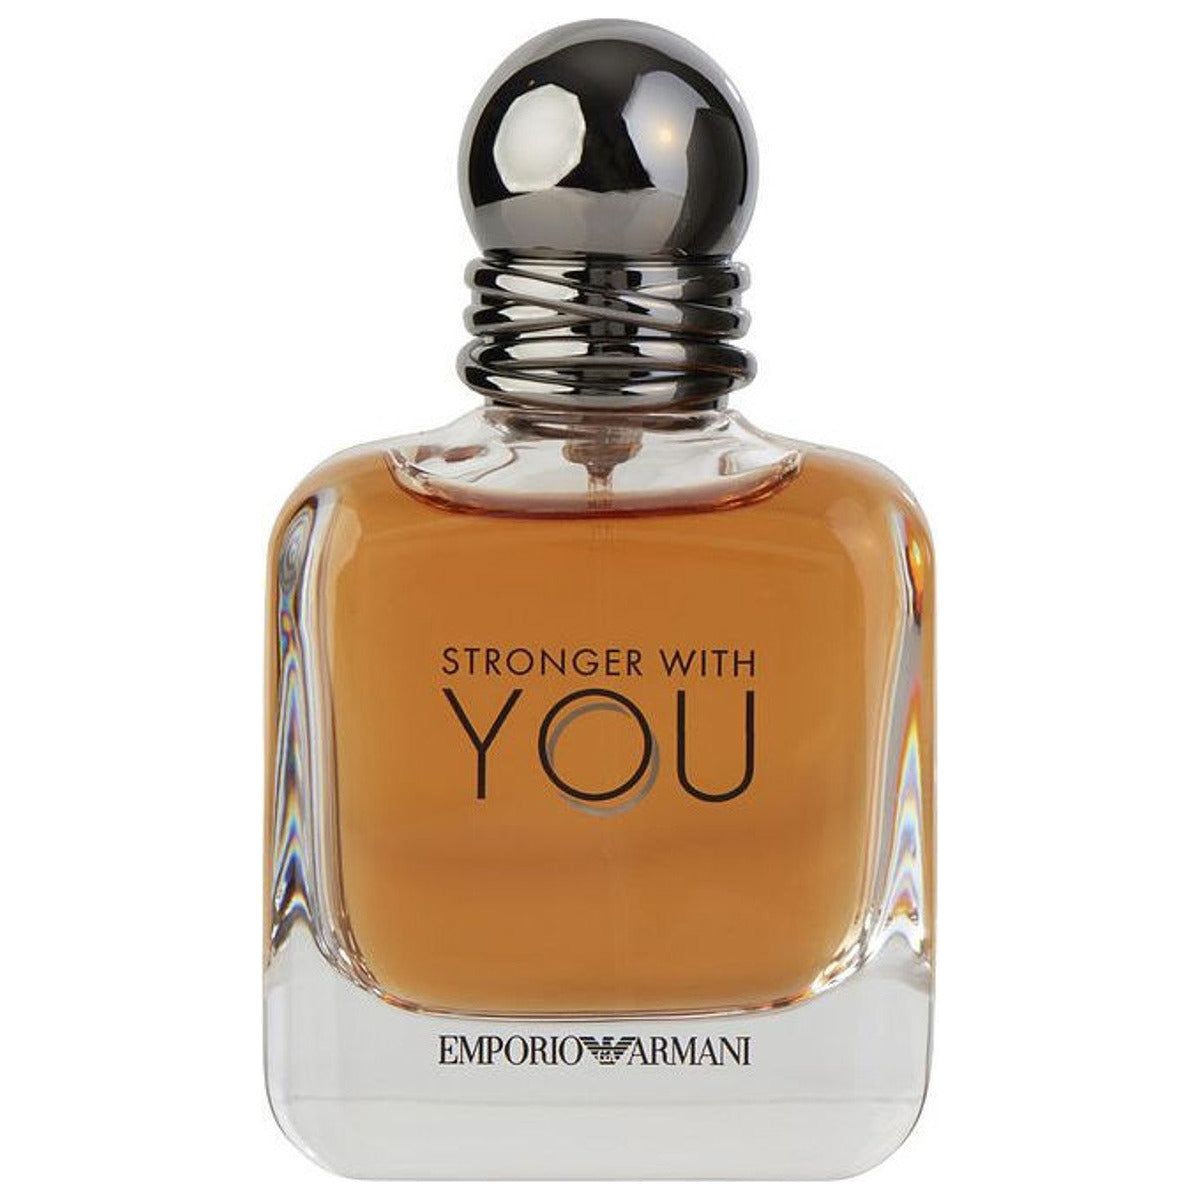 Stronger with You Emporio by Armani cologne men EDT 3.3 / 3.4 oz New T